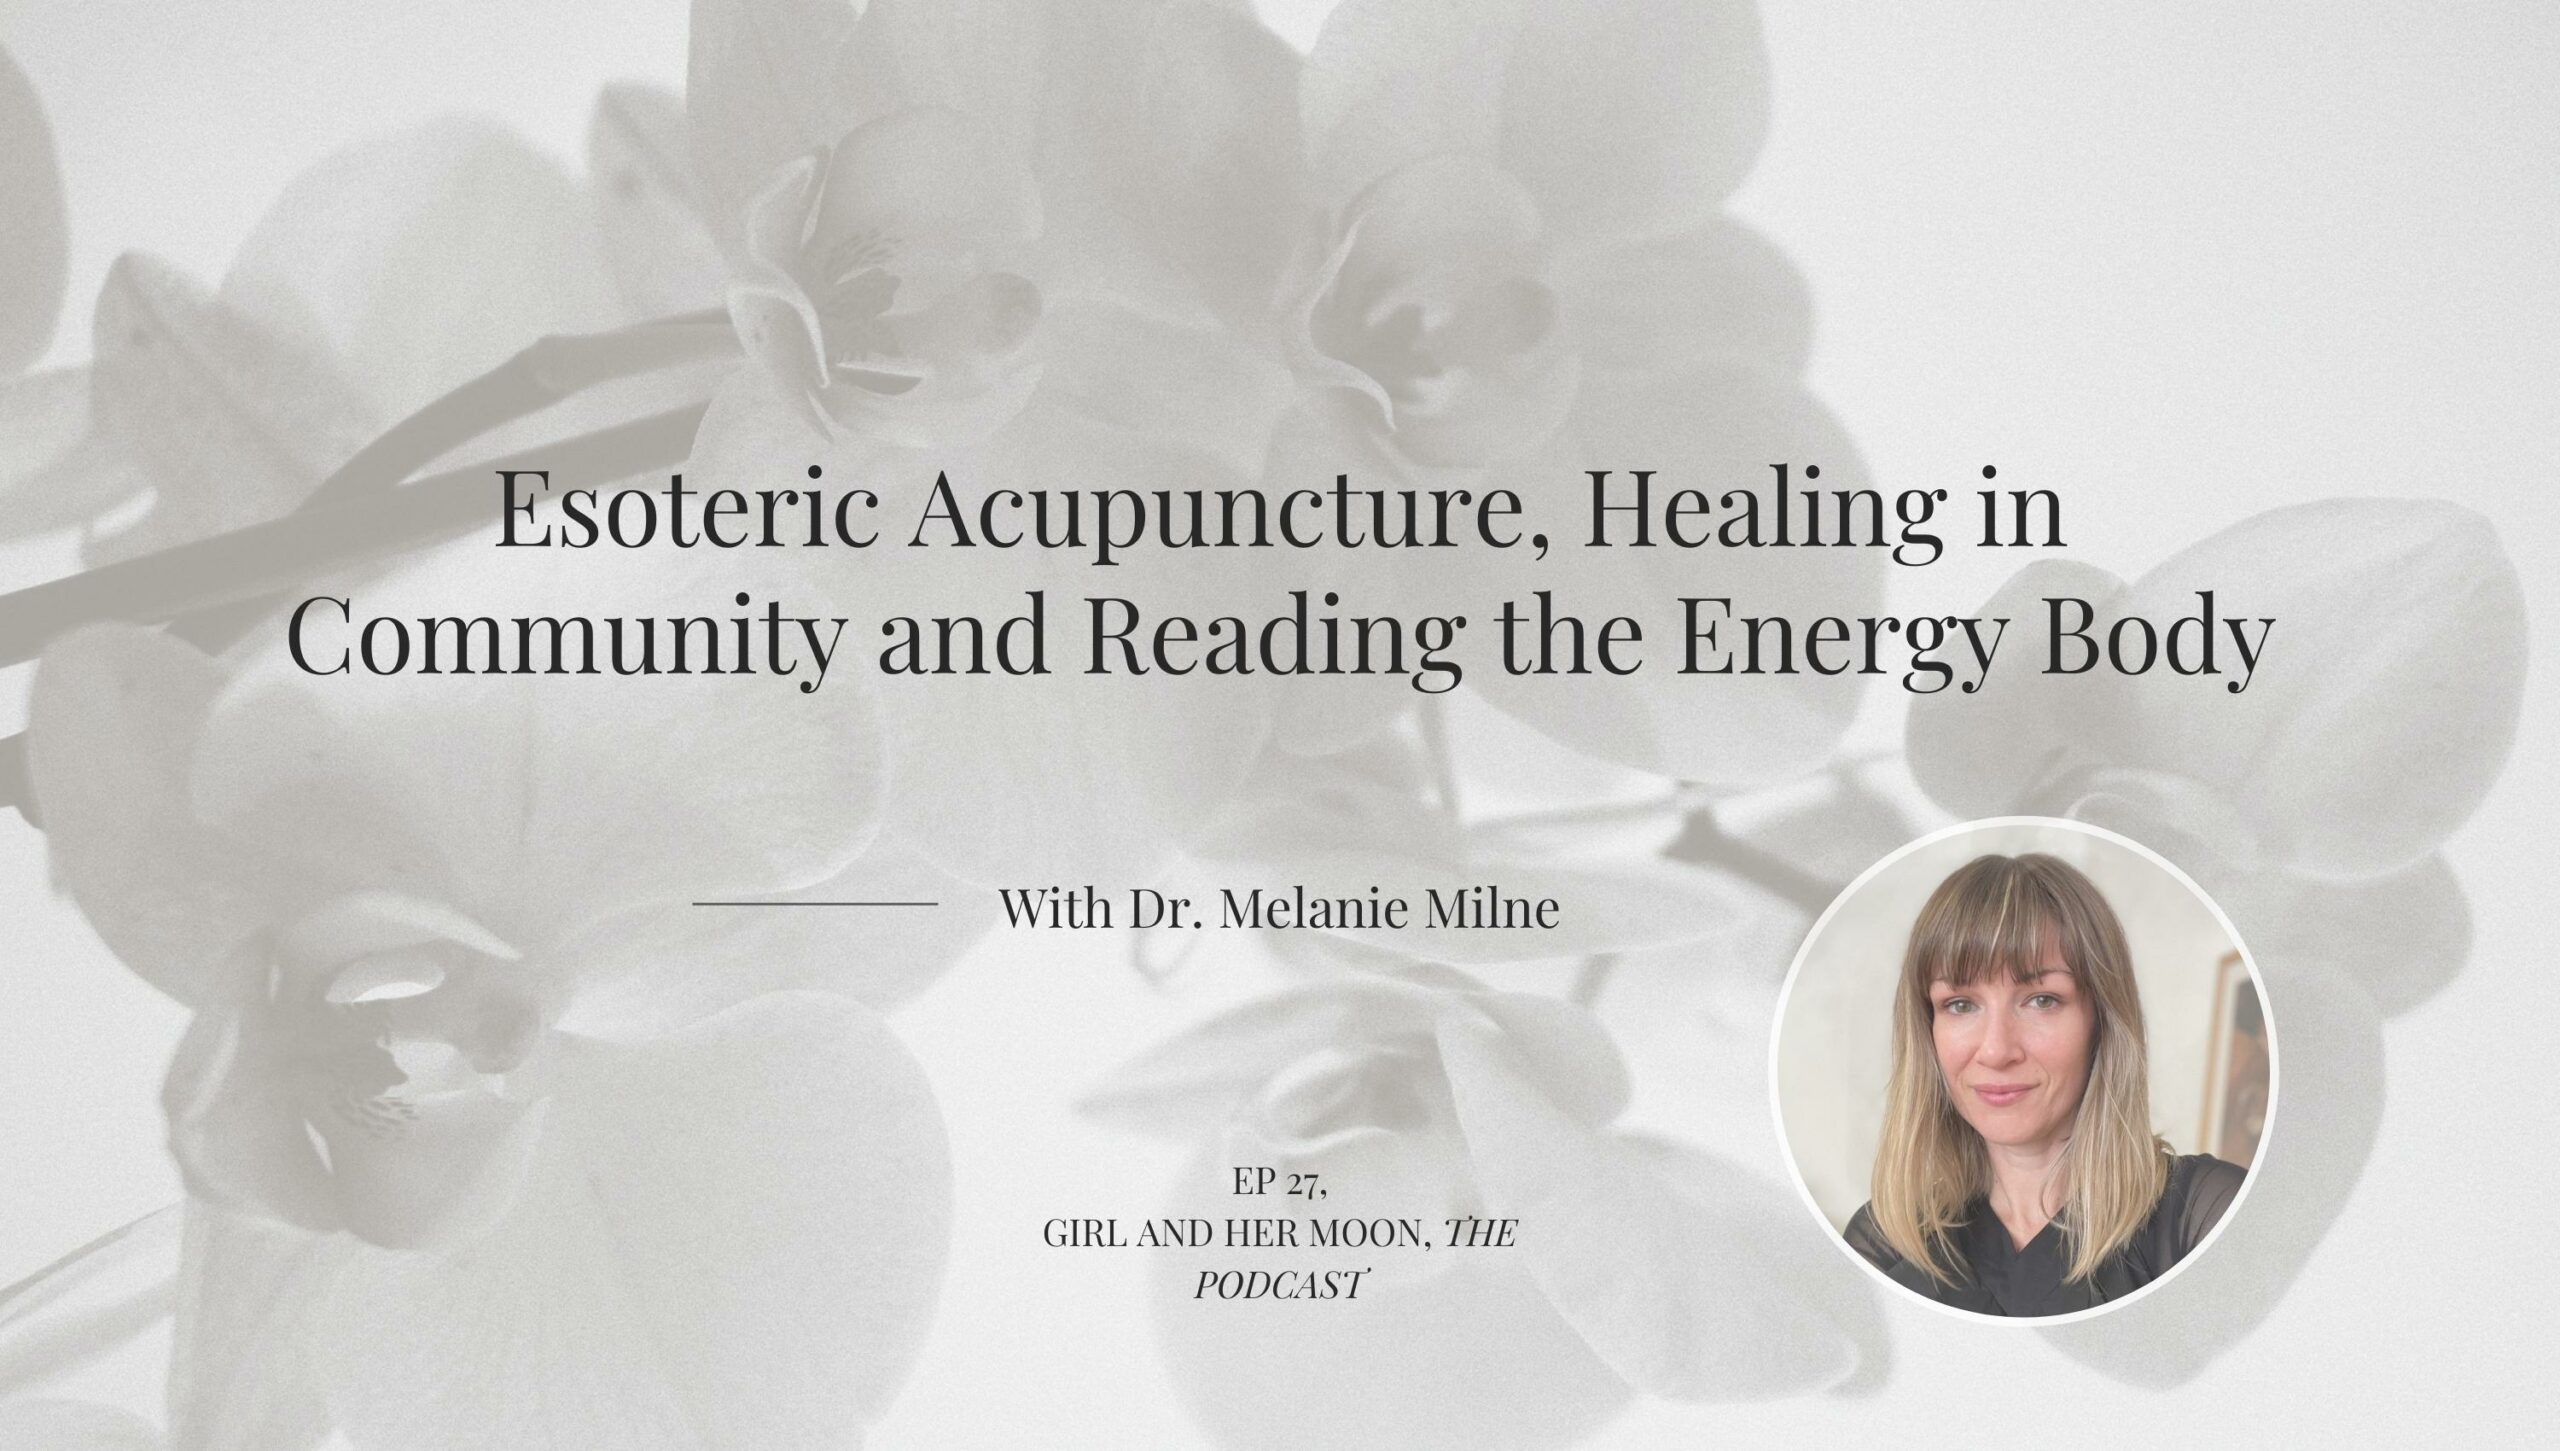 Esoteric Acupuncture, Healing in Community and Reading the Energy Body with Dr. Melanie Milne